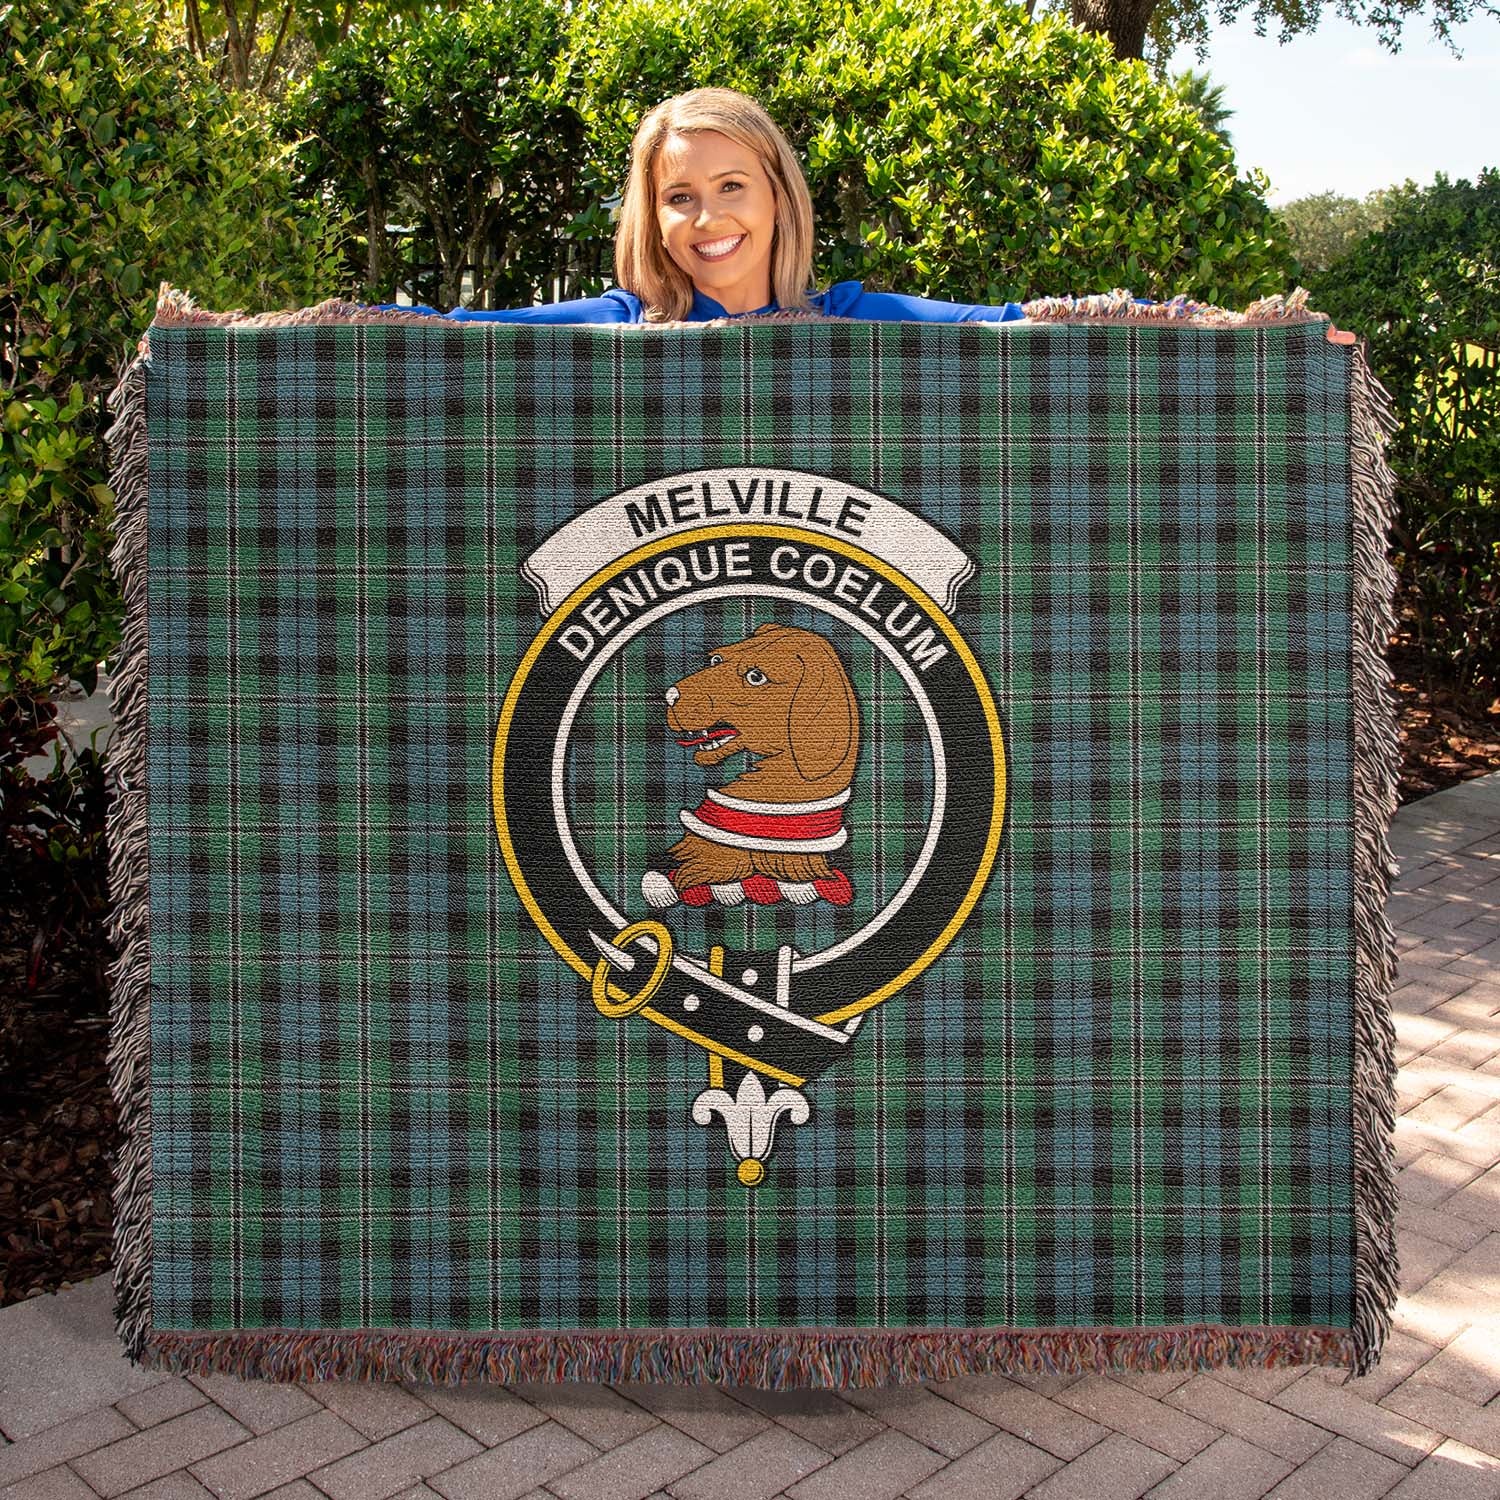 Tartan Vibes Clothing Melville Tartan Woven Blanket with Family Crest